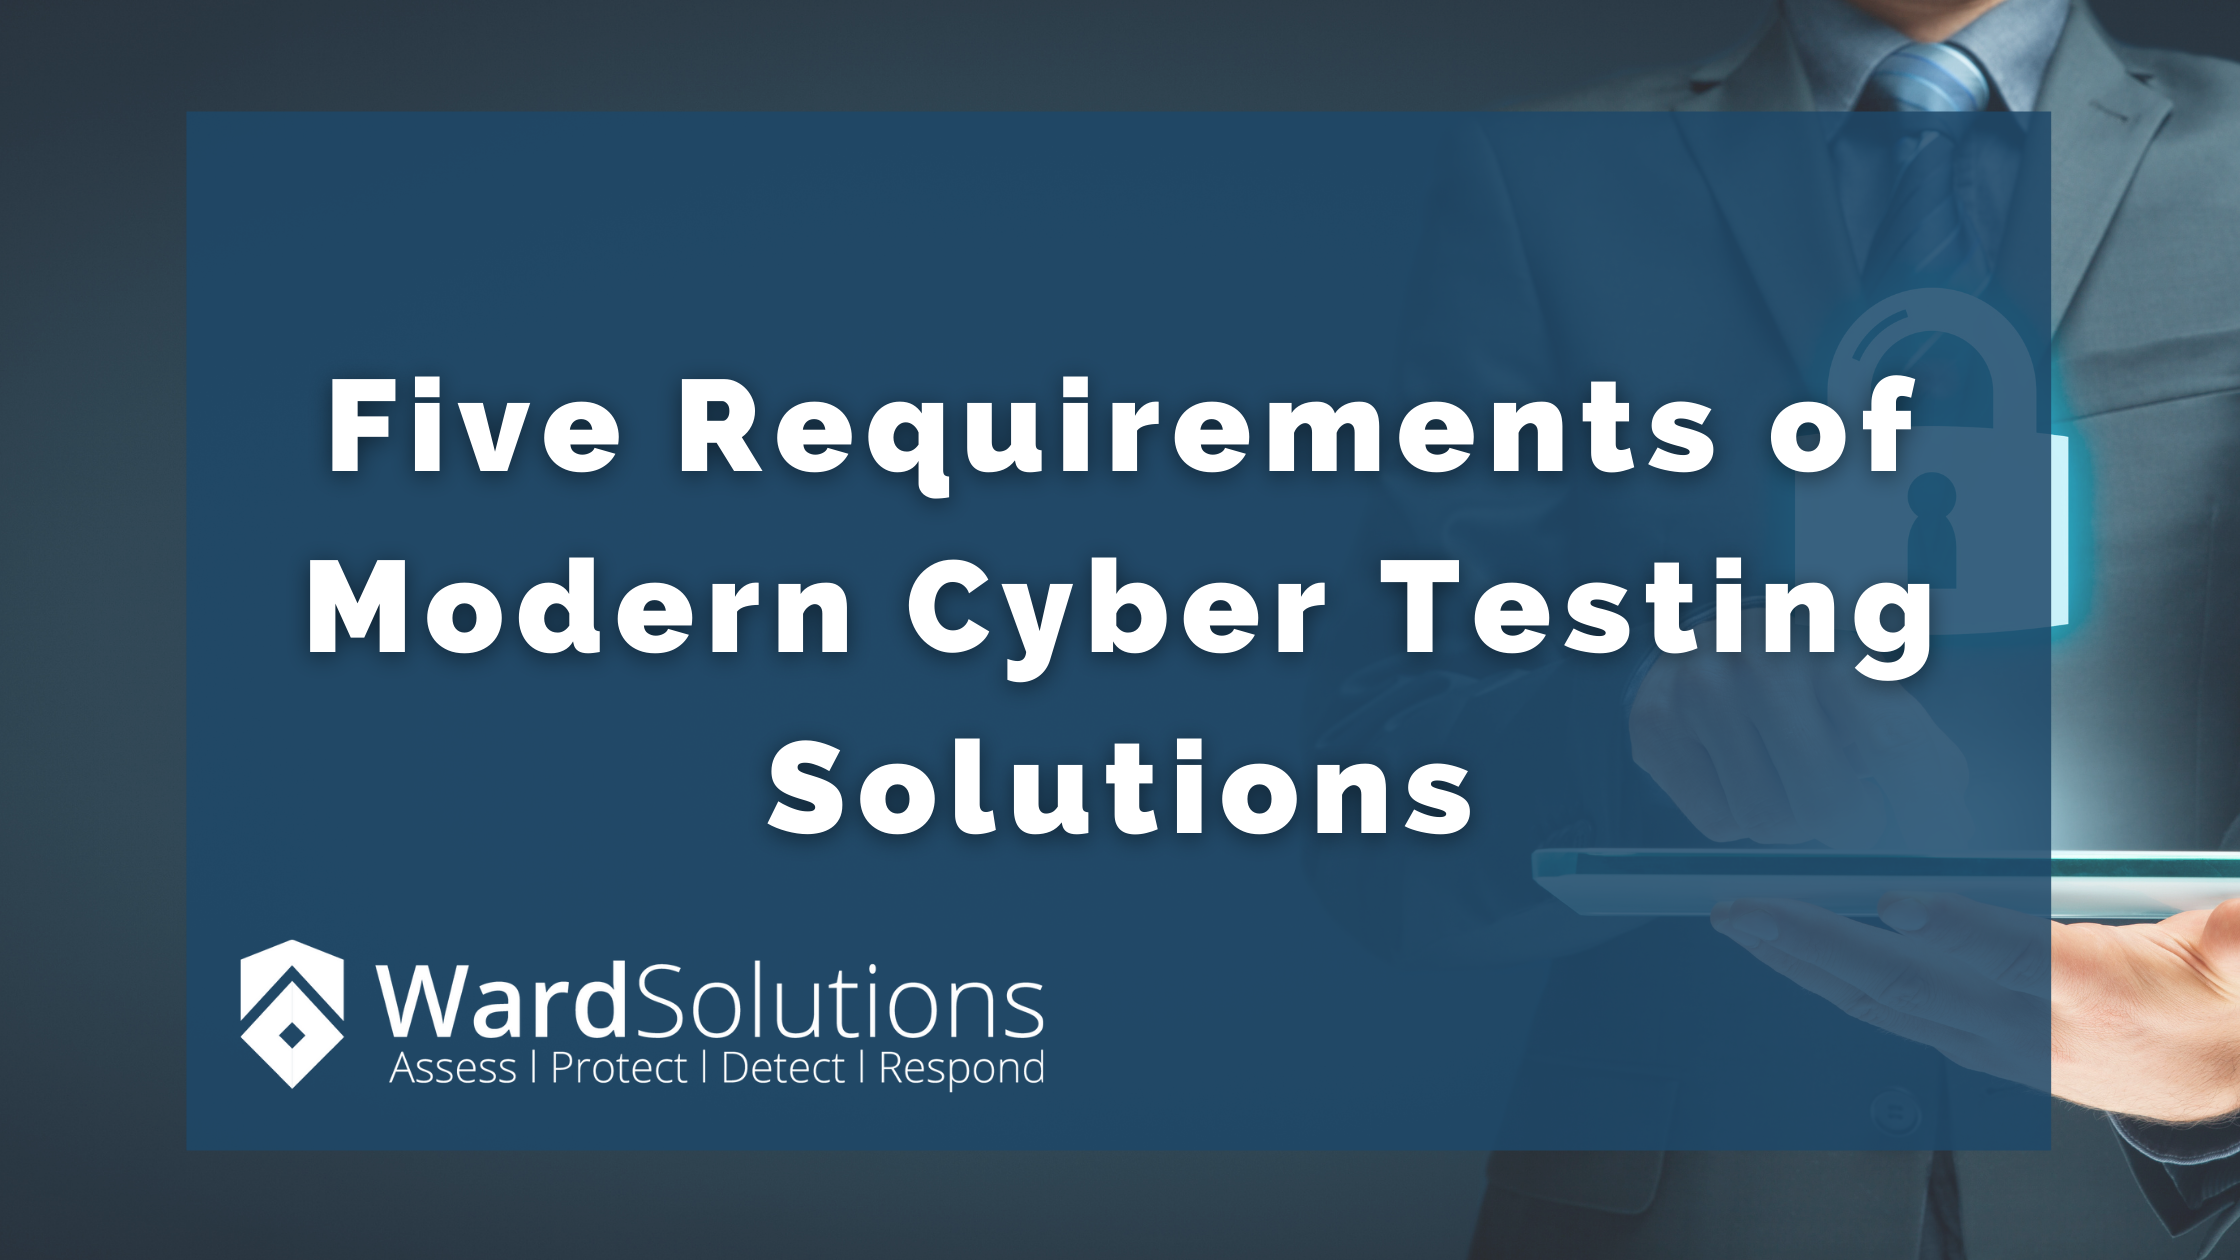 5 Requirements of Modern Cyber Testing Solutions